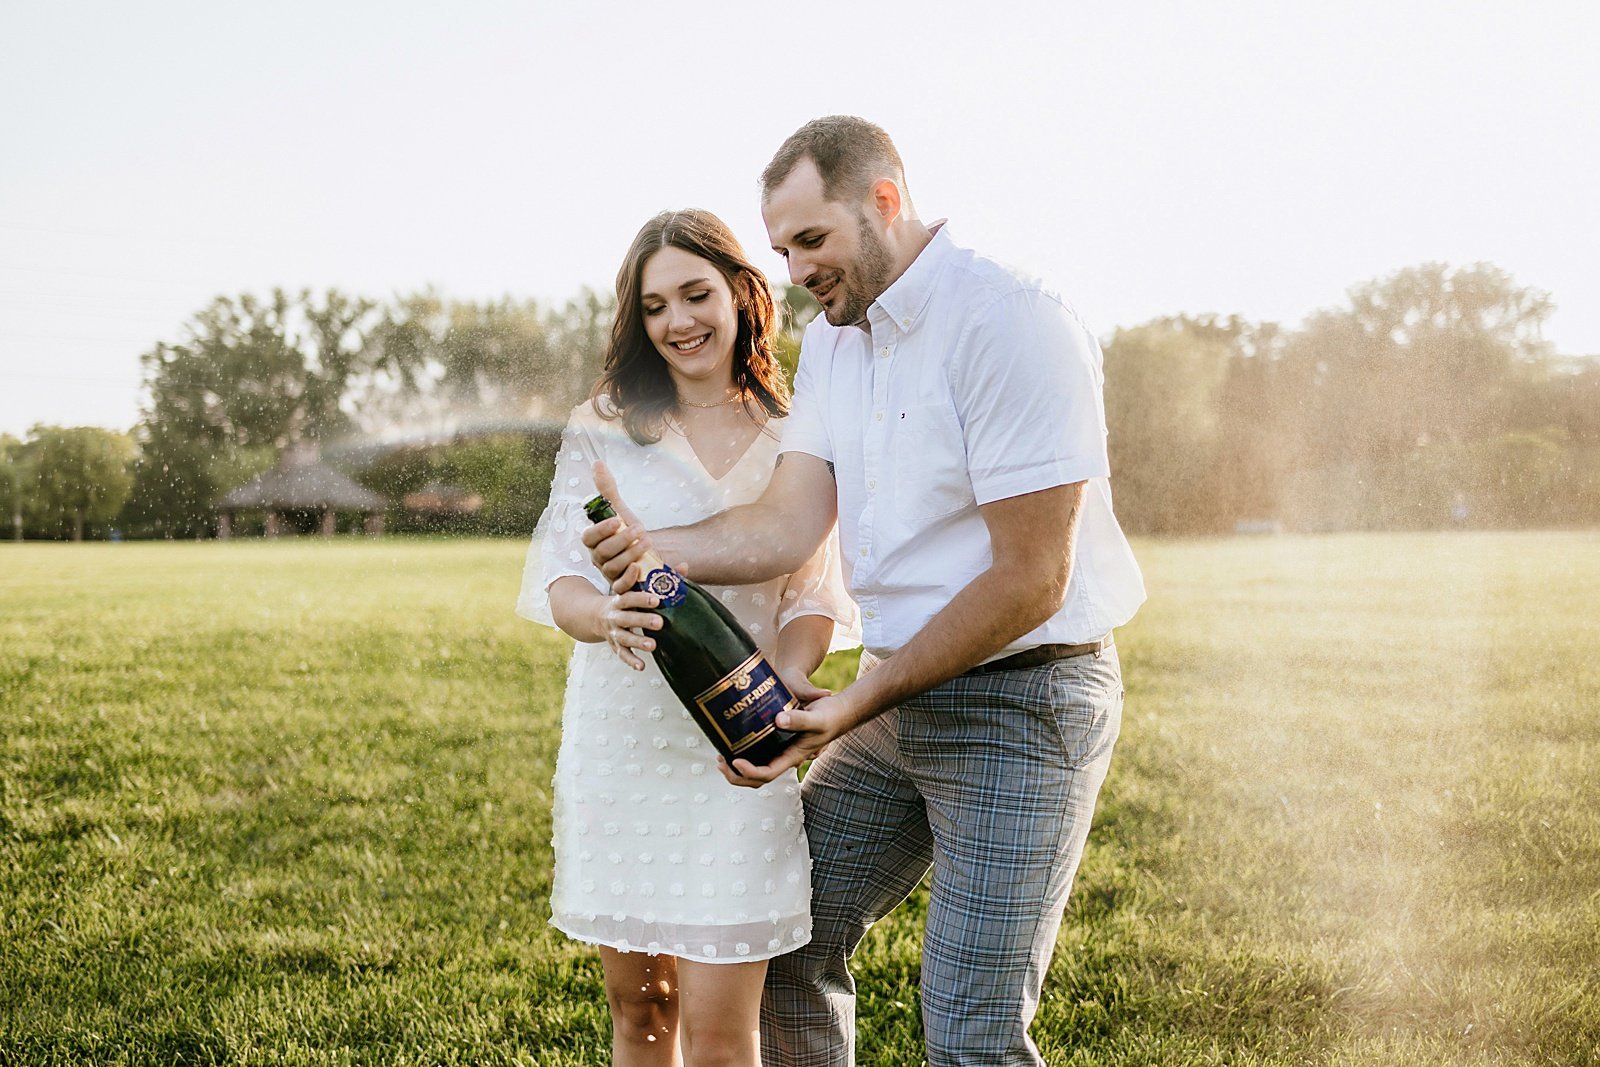  Couple popping champagne during their sunrise engagement session in a field.  